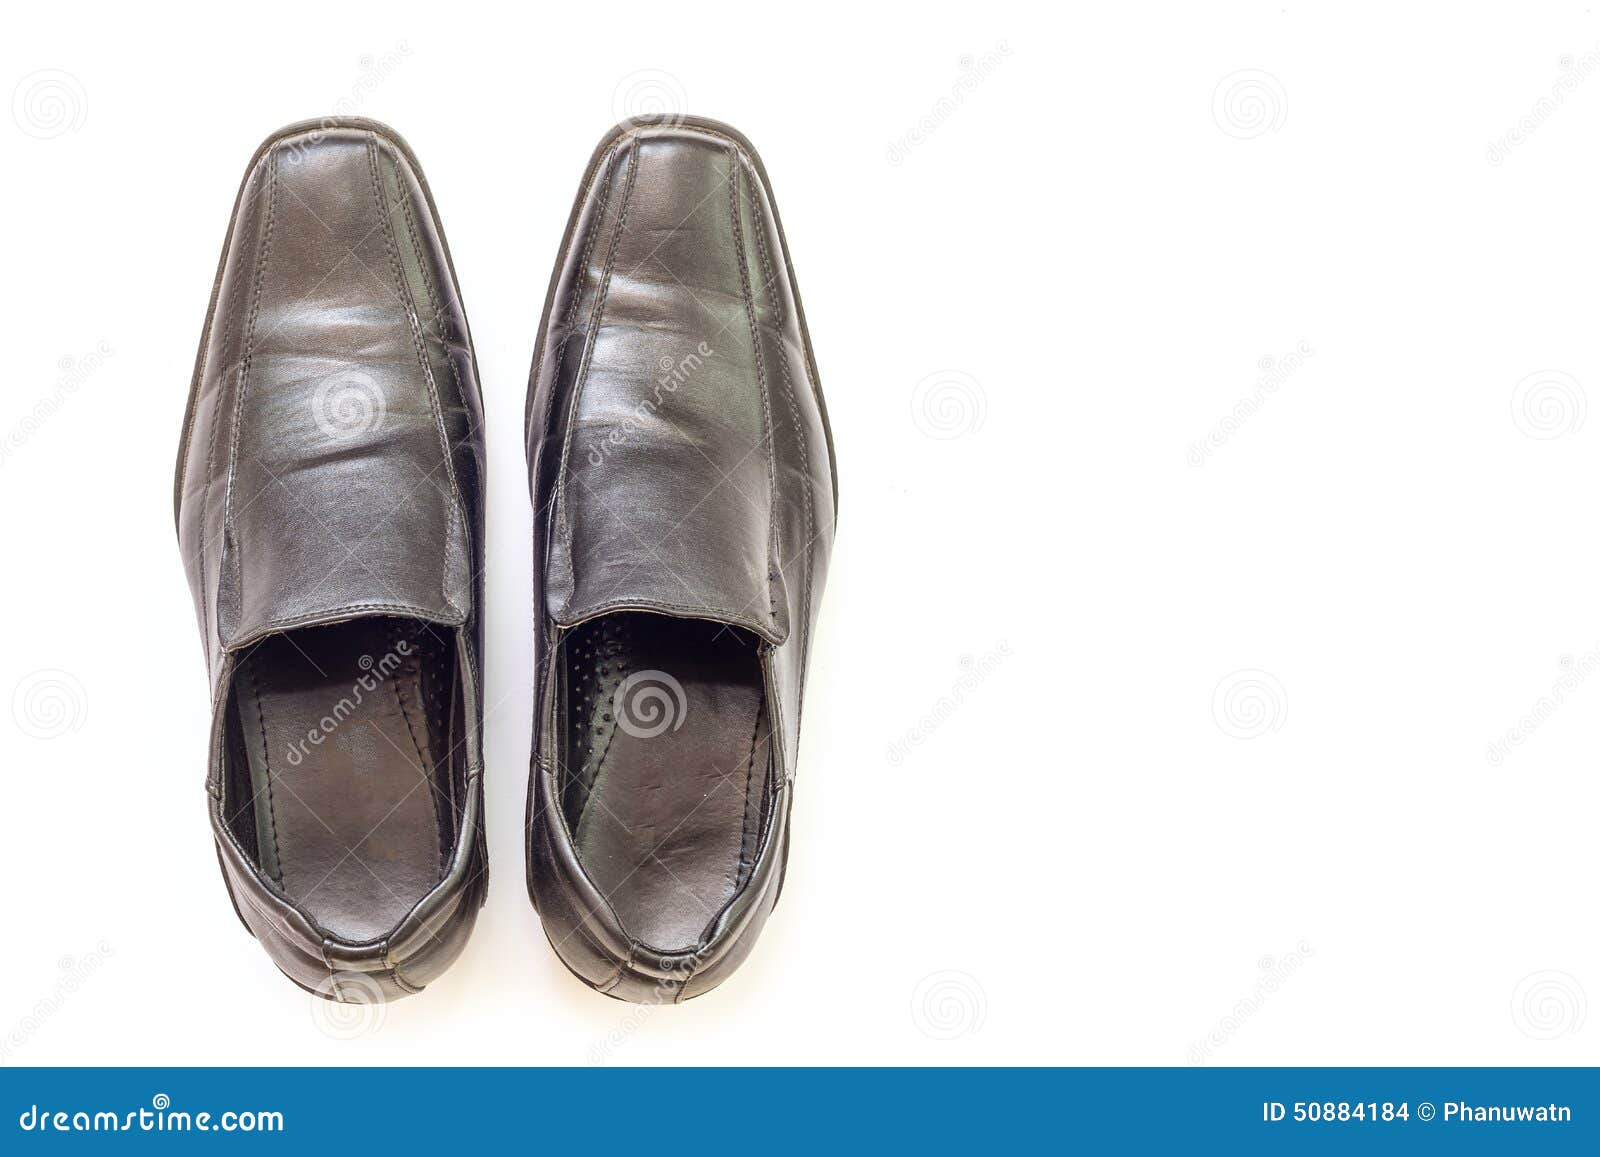 Old black man s shoes stock photo. Image of rows, male - 50884184